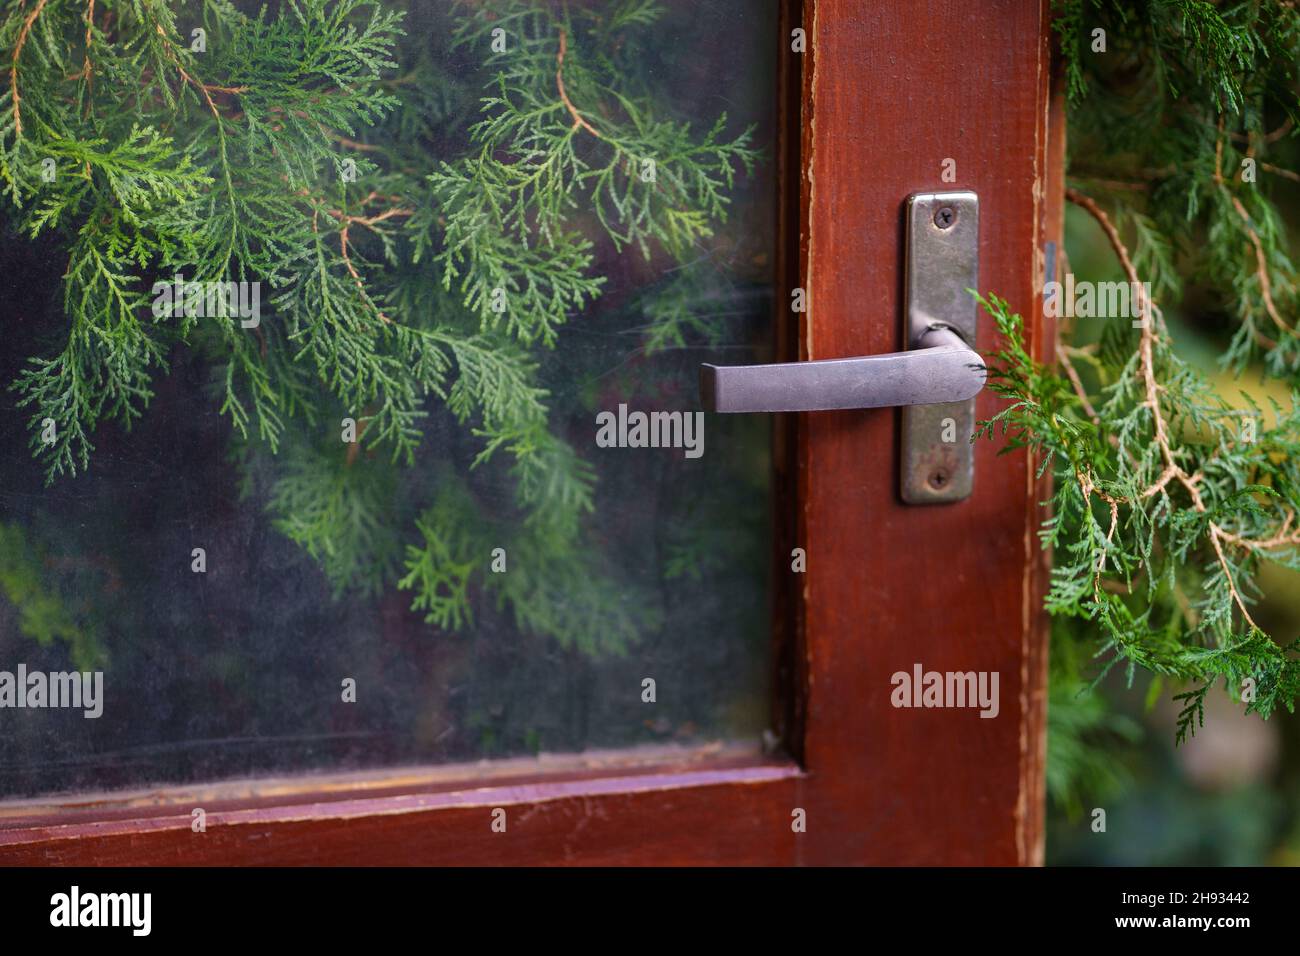 Closeup of old wooden red door with metal handle in greenhouse, evergreen thuja plant behind glass. Stock Photo